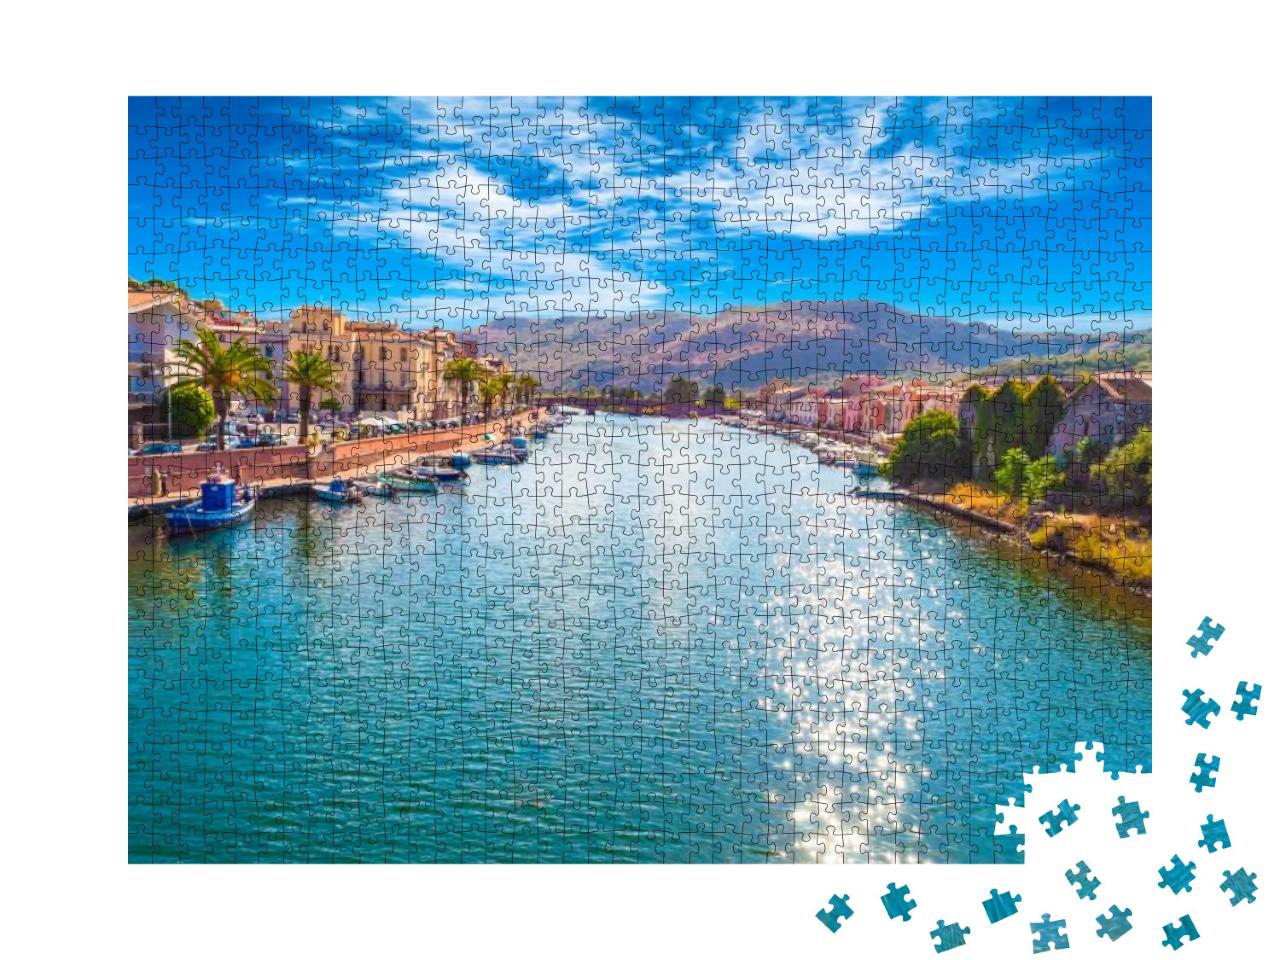 Old Village of Bosa on the River Temo, in Sardinia, in a... Jigsaw Puzzle with 1000 pieces